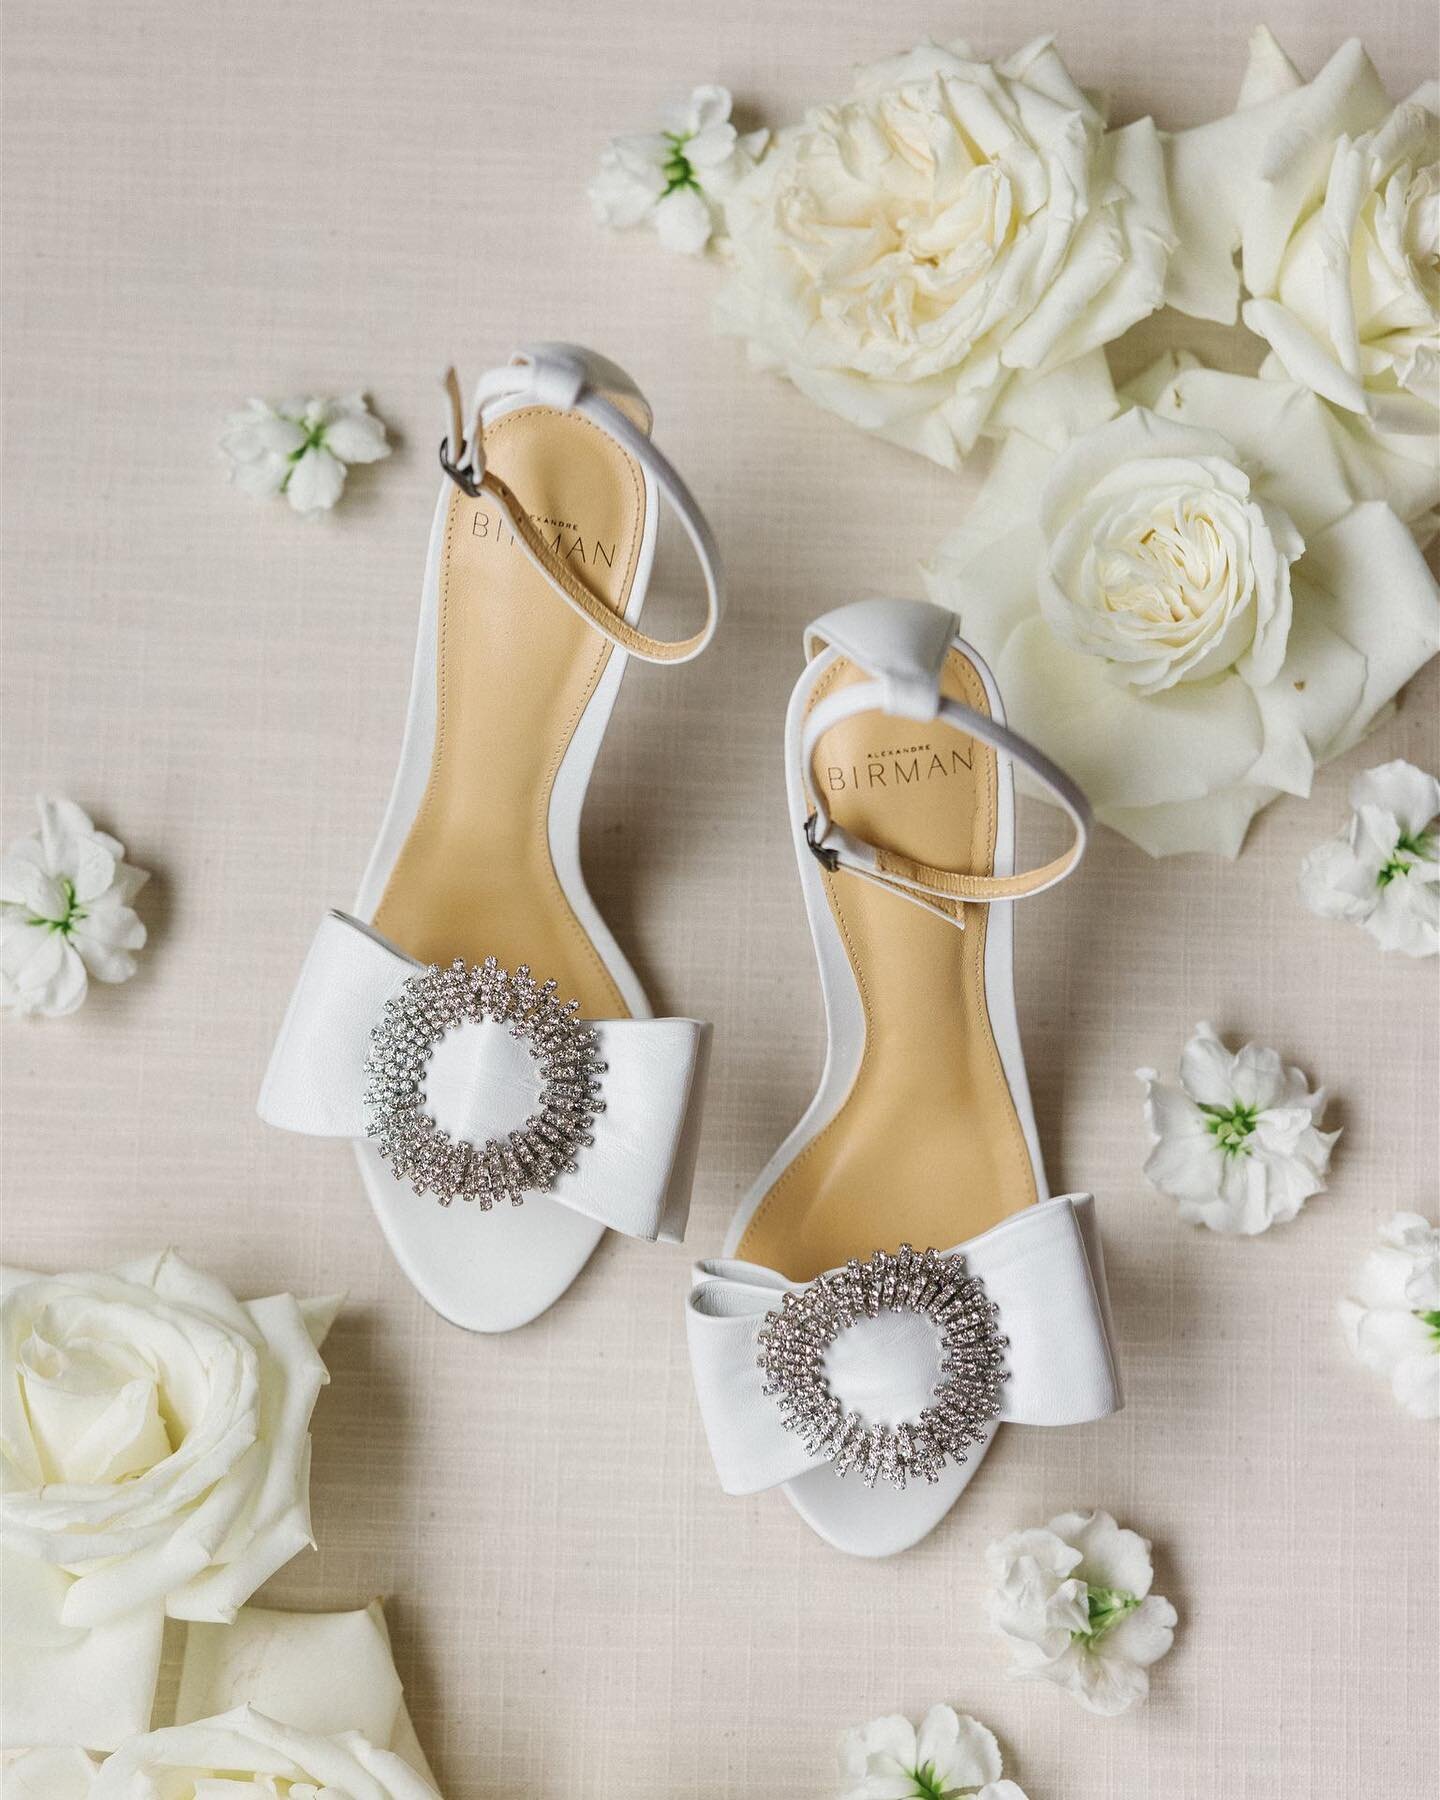 Taking a moment to appreciate these gorgeous wedding shoes 🤩 Savannah incorporated a nod to bows on her wedding day and they shined through in the most perfect places like her wedding shoes, custom earrings, and even the napkin fold on the table. 🤍